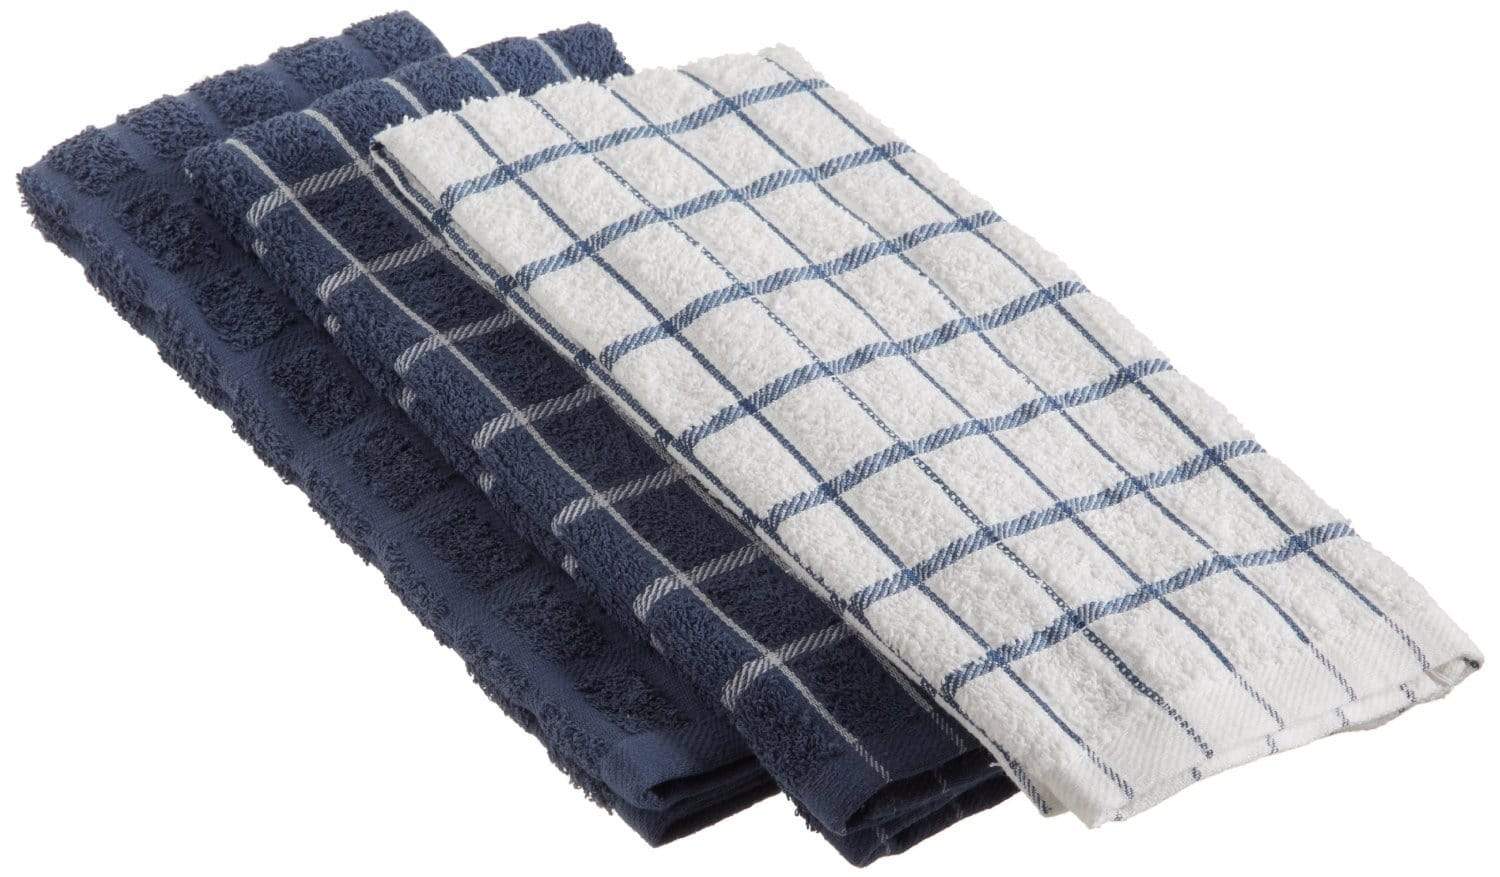 RITZ Royale Federal Blue Checkered Cotton Kitchen Towel (Set of 2) 013124 -  The Home Depot